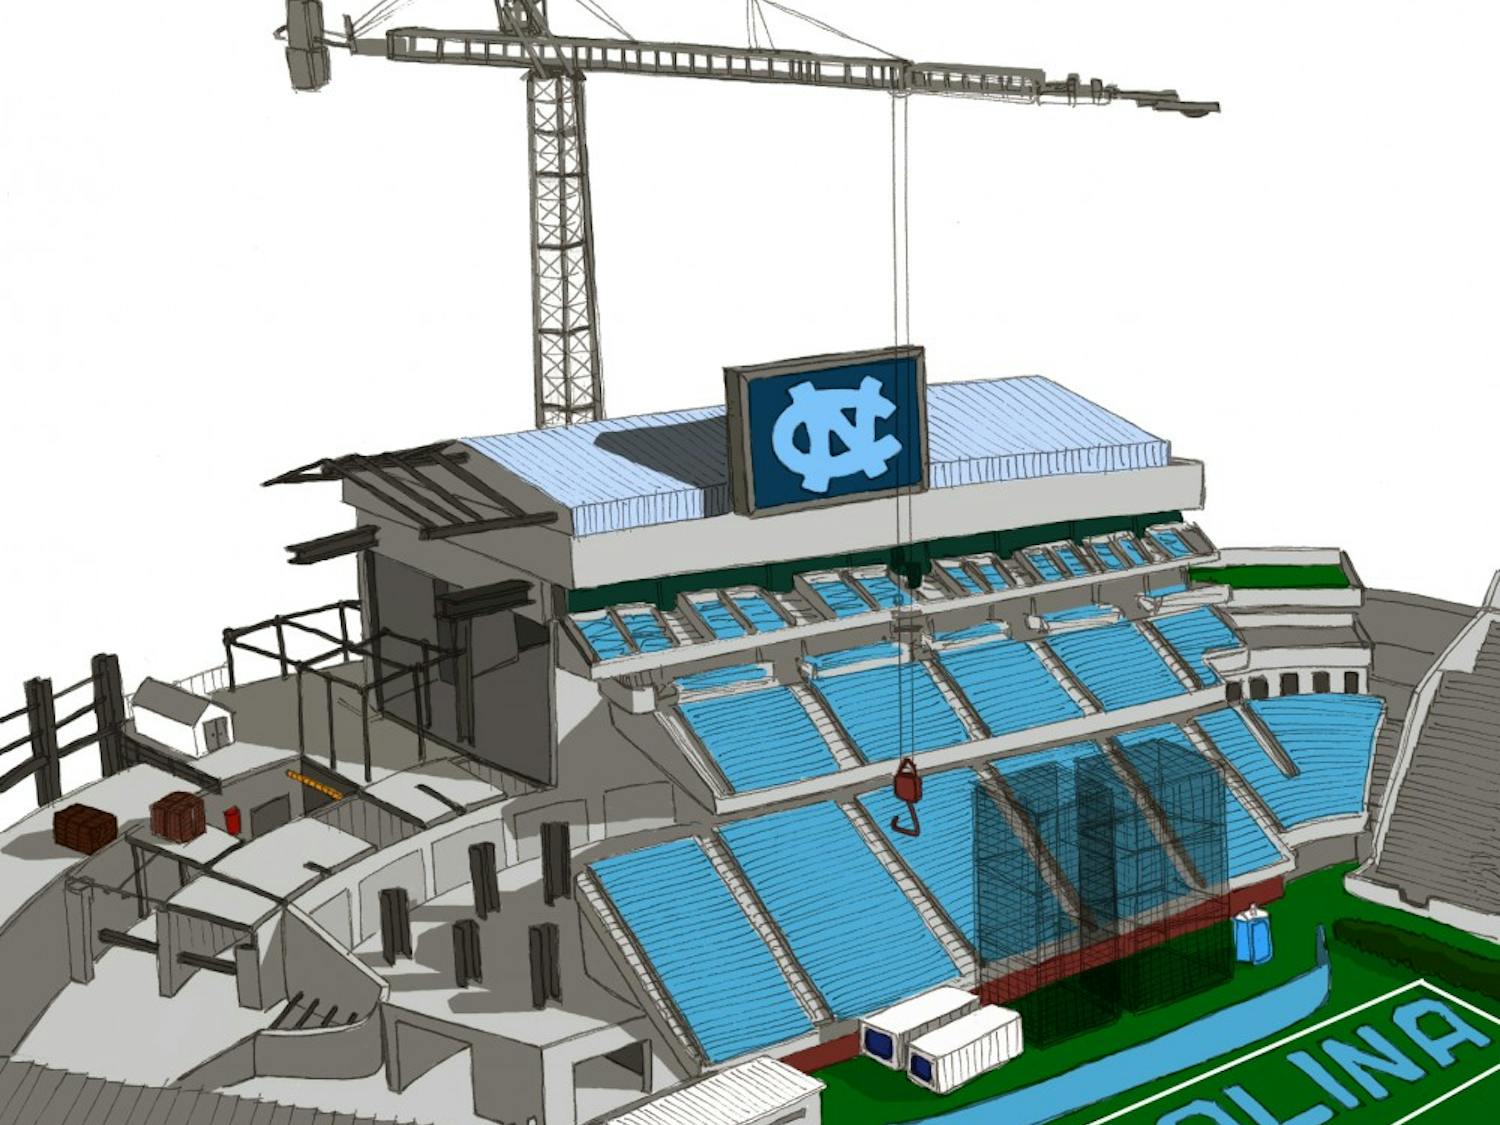 	The Rams Club, UNC’s athletic booster club, plans for Kenan Stadium’s east end zone to be completed in time for North Carolina’s first home football game in the 2011 season. Officials said the club has exceeded its expectations for donations, which will pay for $35 million out of the $70 million total for the project. 